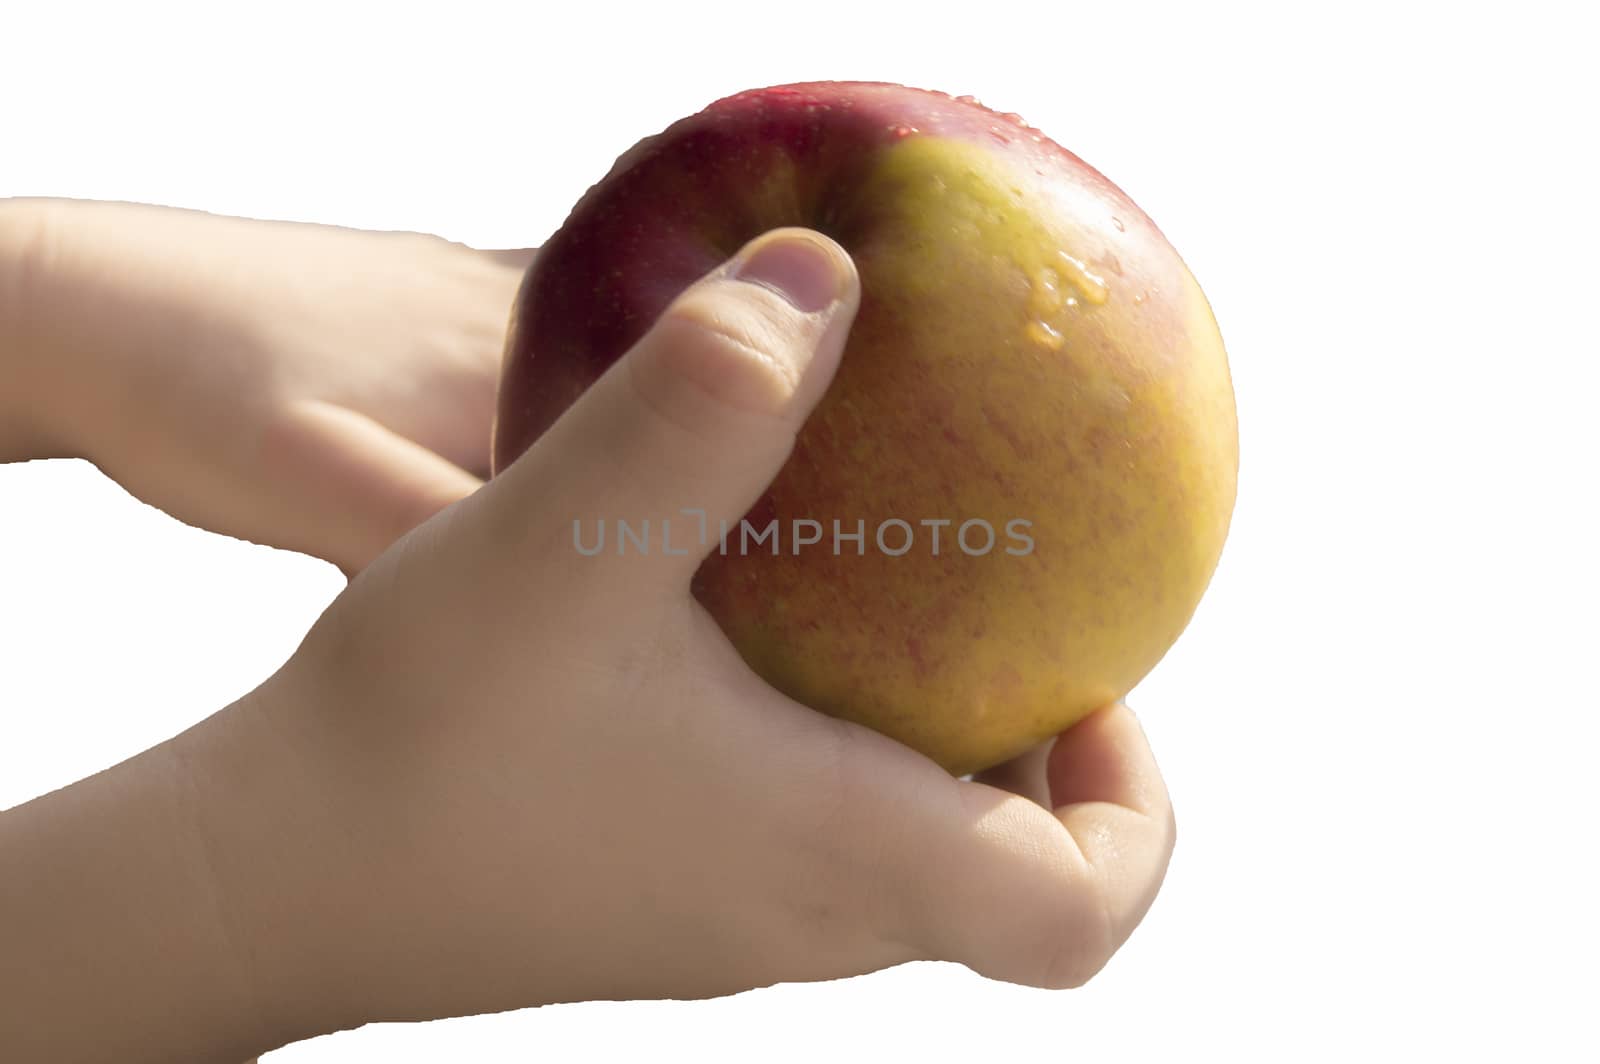 Clipping, baby holding a ripe Apple, close-up, sunlight, healthy food concept for kids.